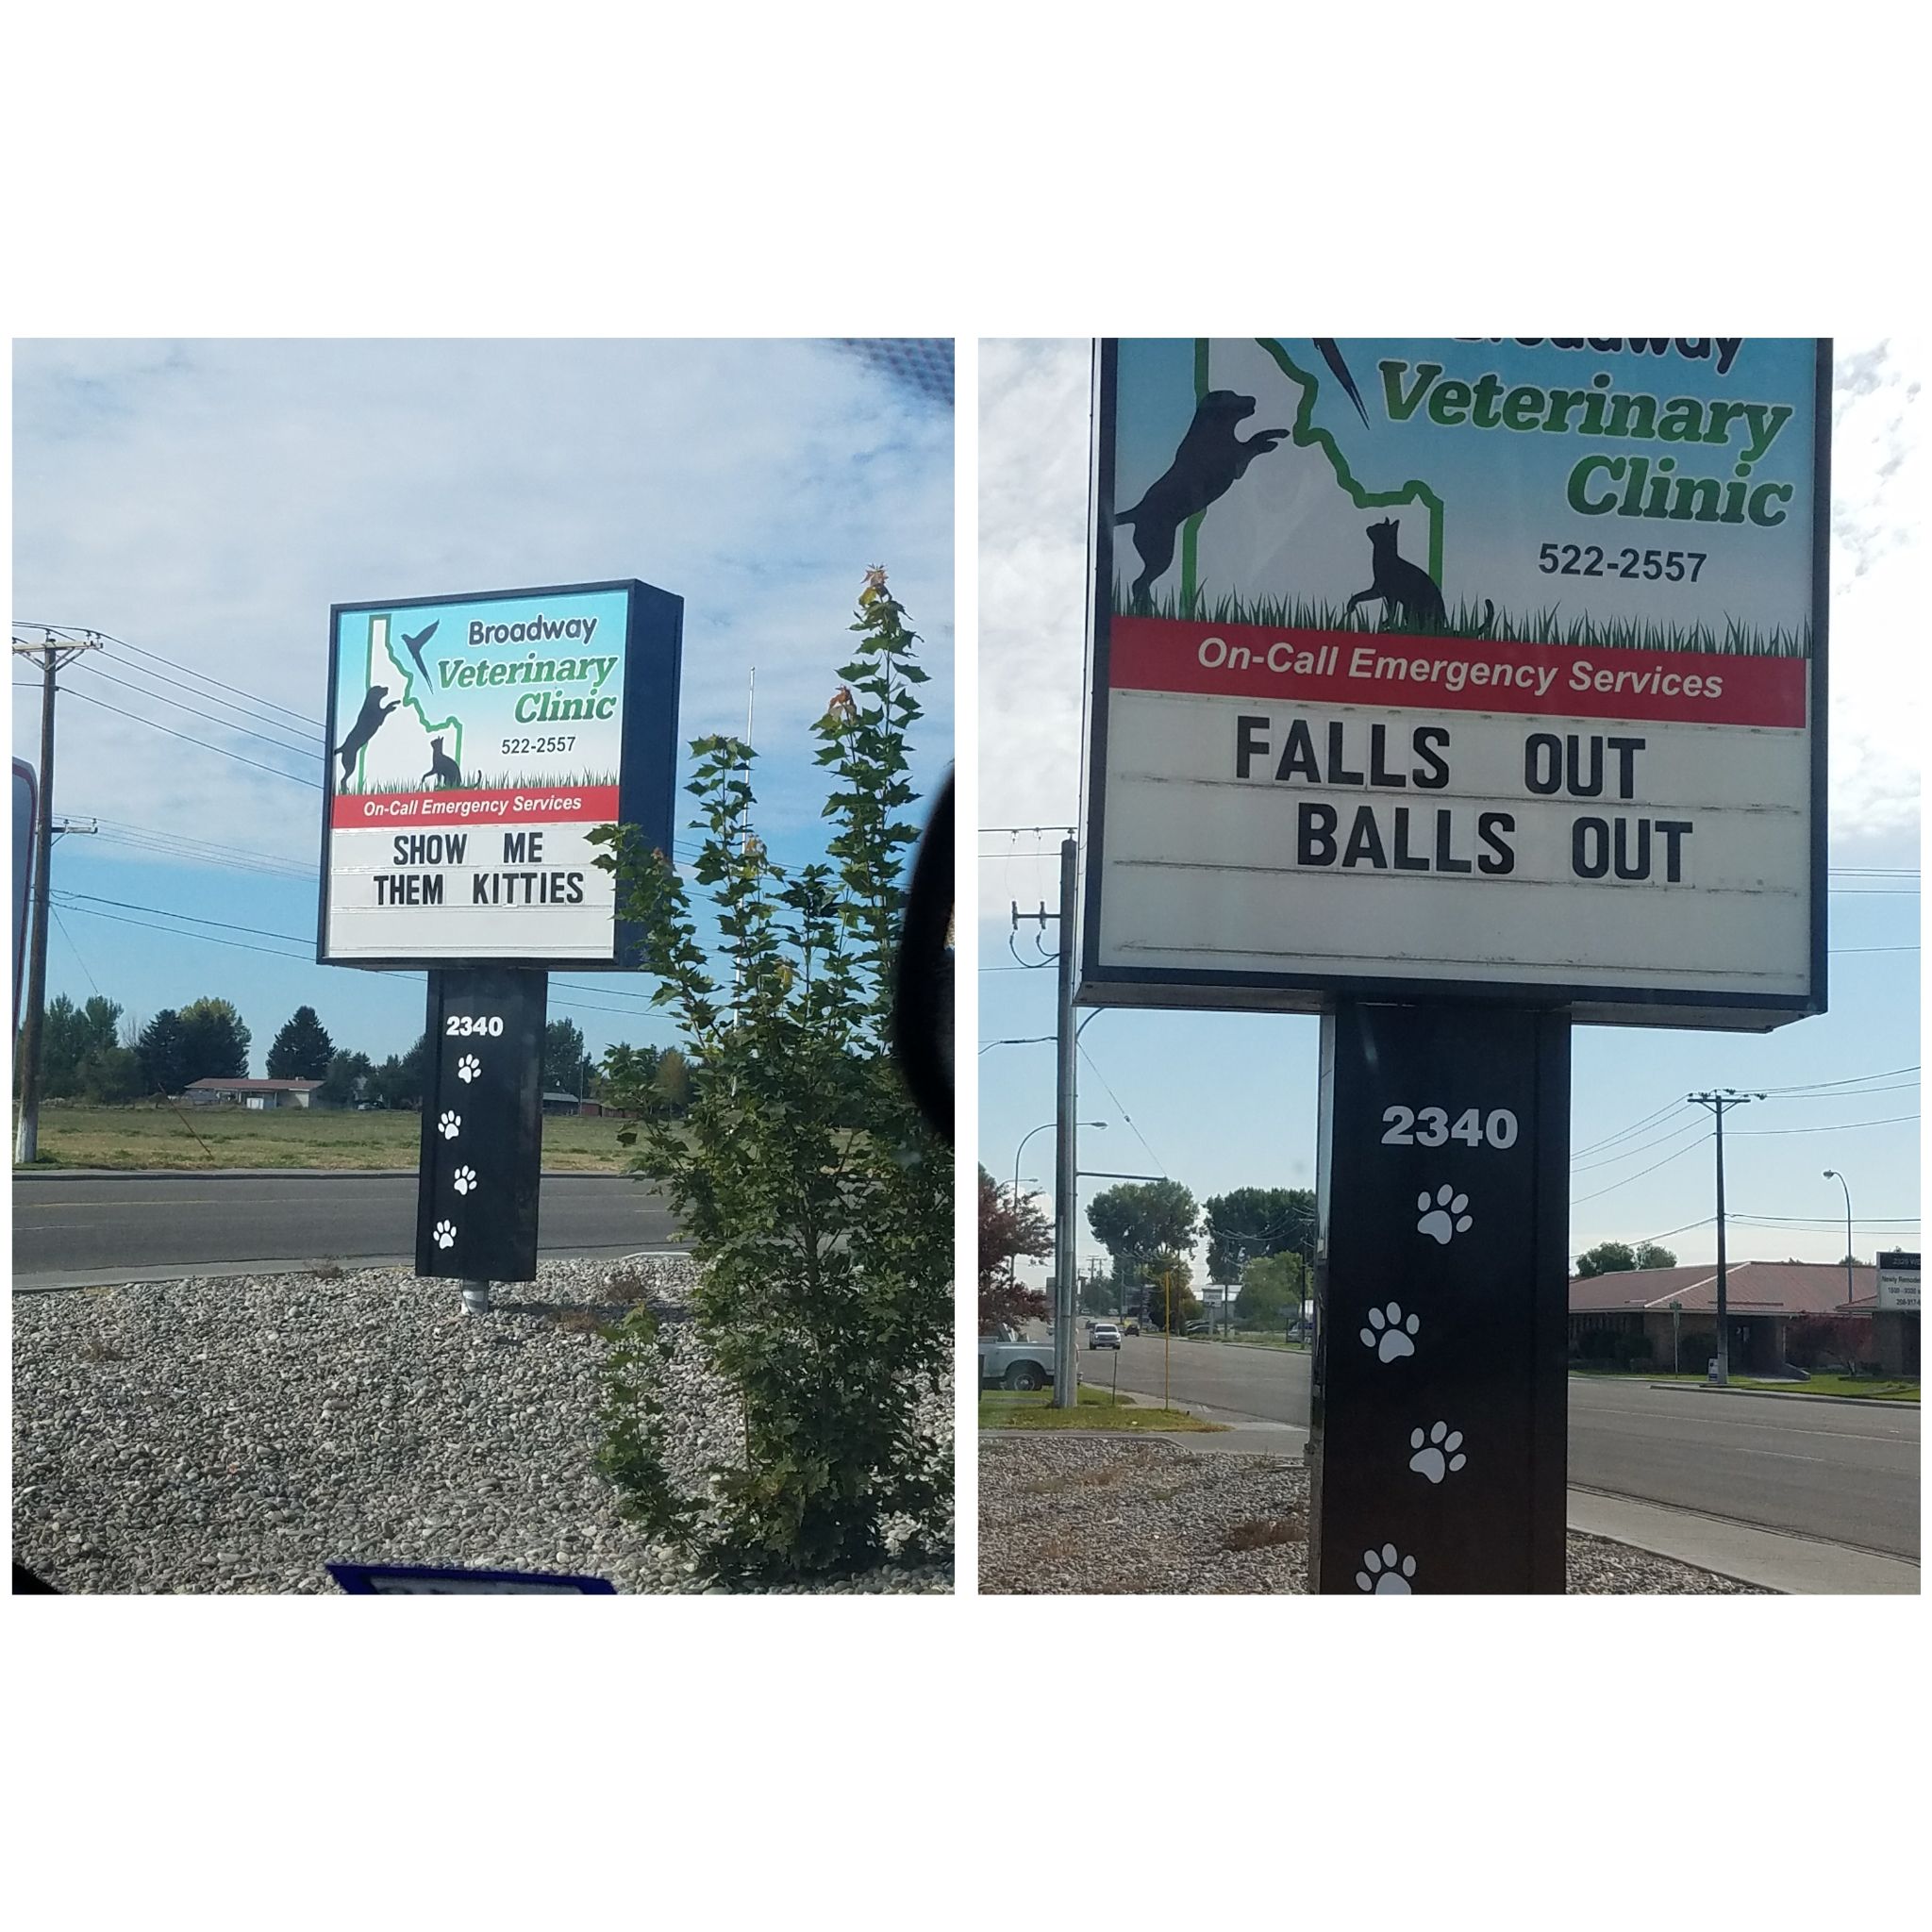 My local vet office is ready for fall